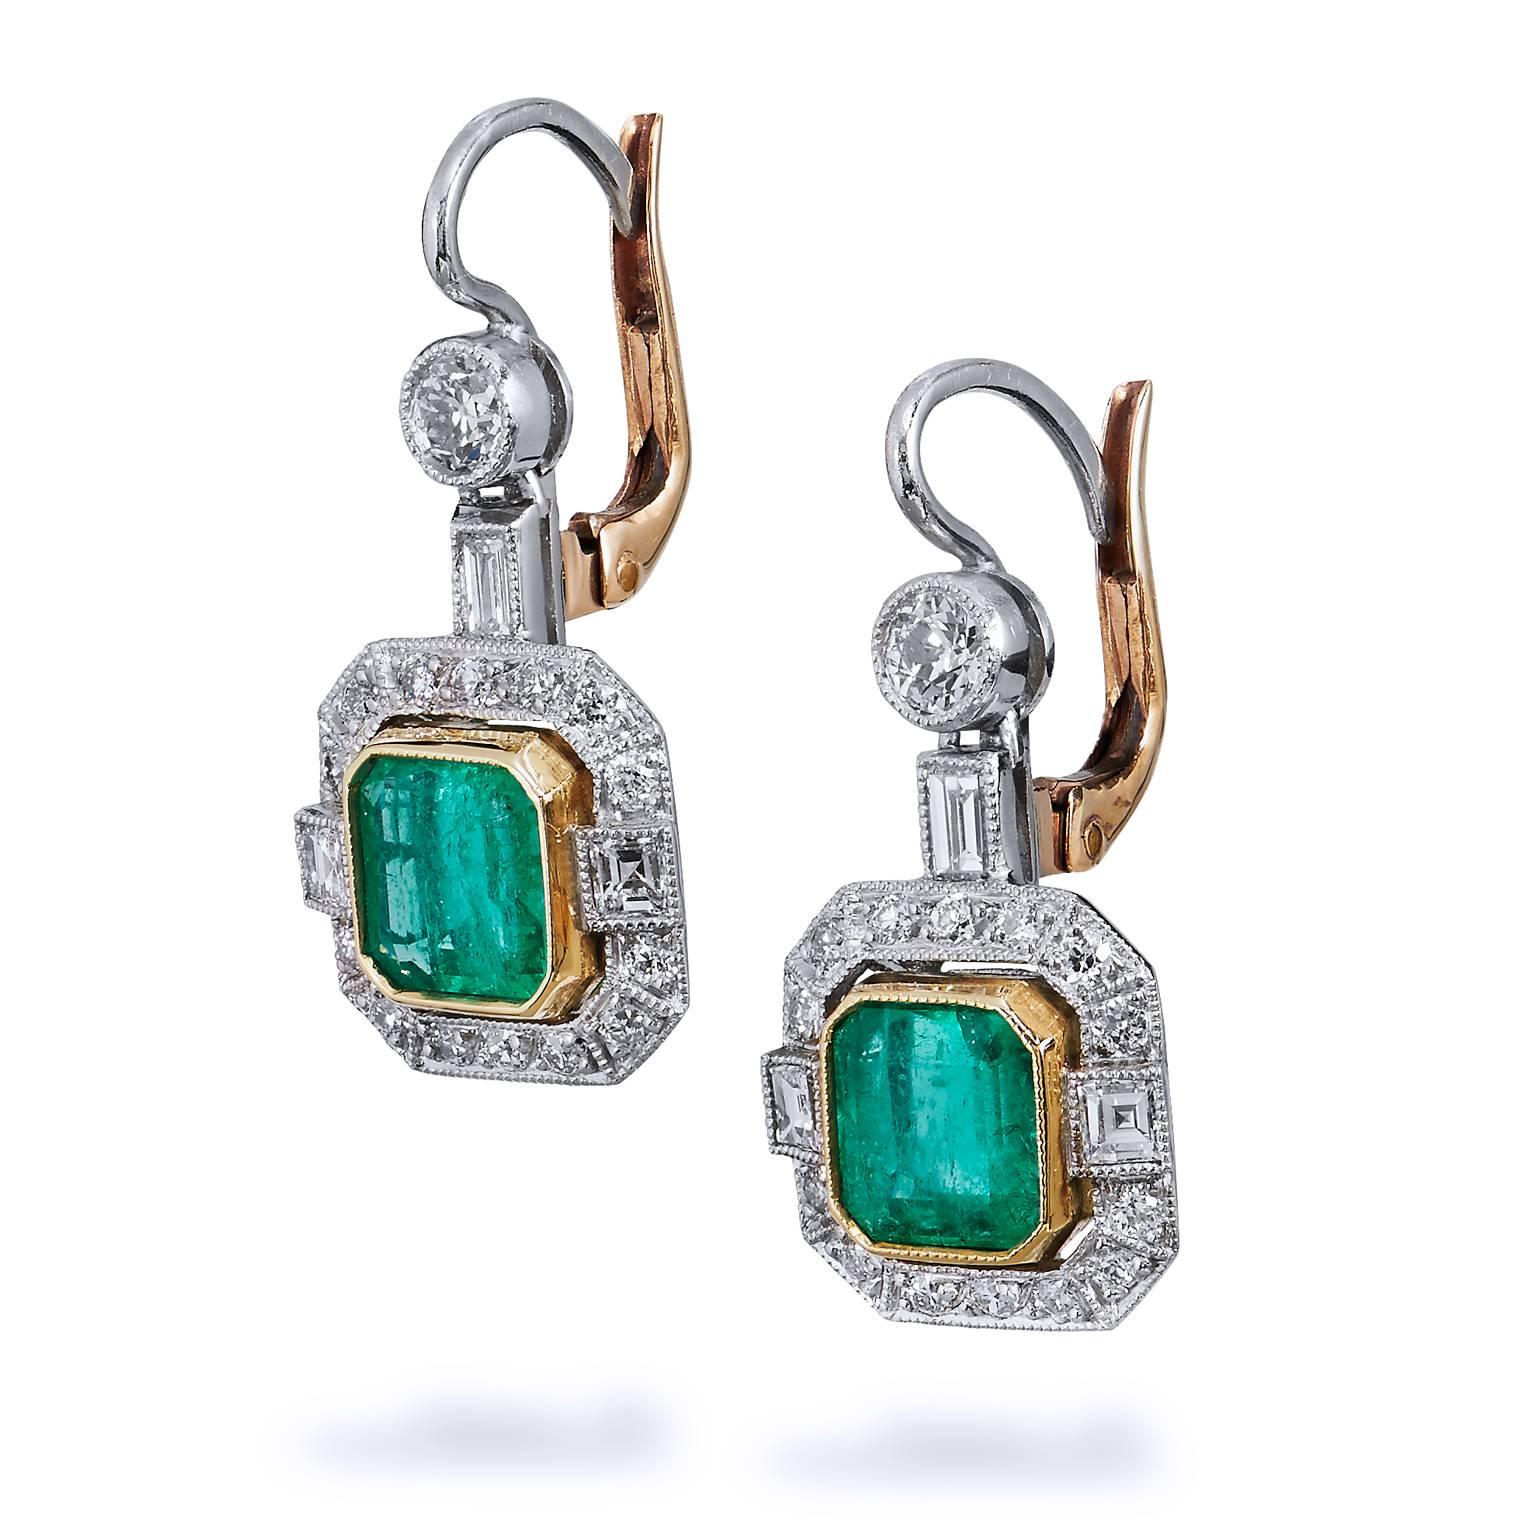 Antique inspired platinum and 18 karat yellow gold drop earrings featuring two Colombian emeralds set at center with a total weight of 2.30cts. For further enhancement, a total weight of 1.20 carat of Old European cut, Carre cut and straight